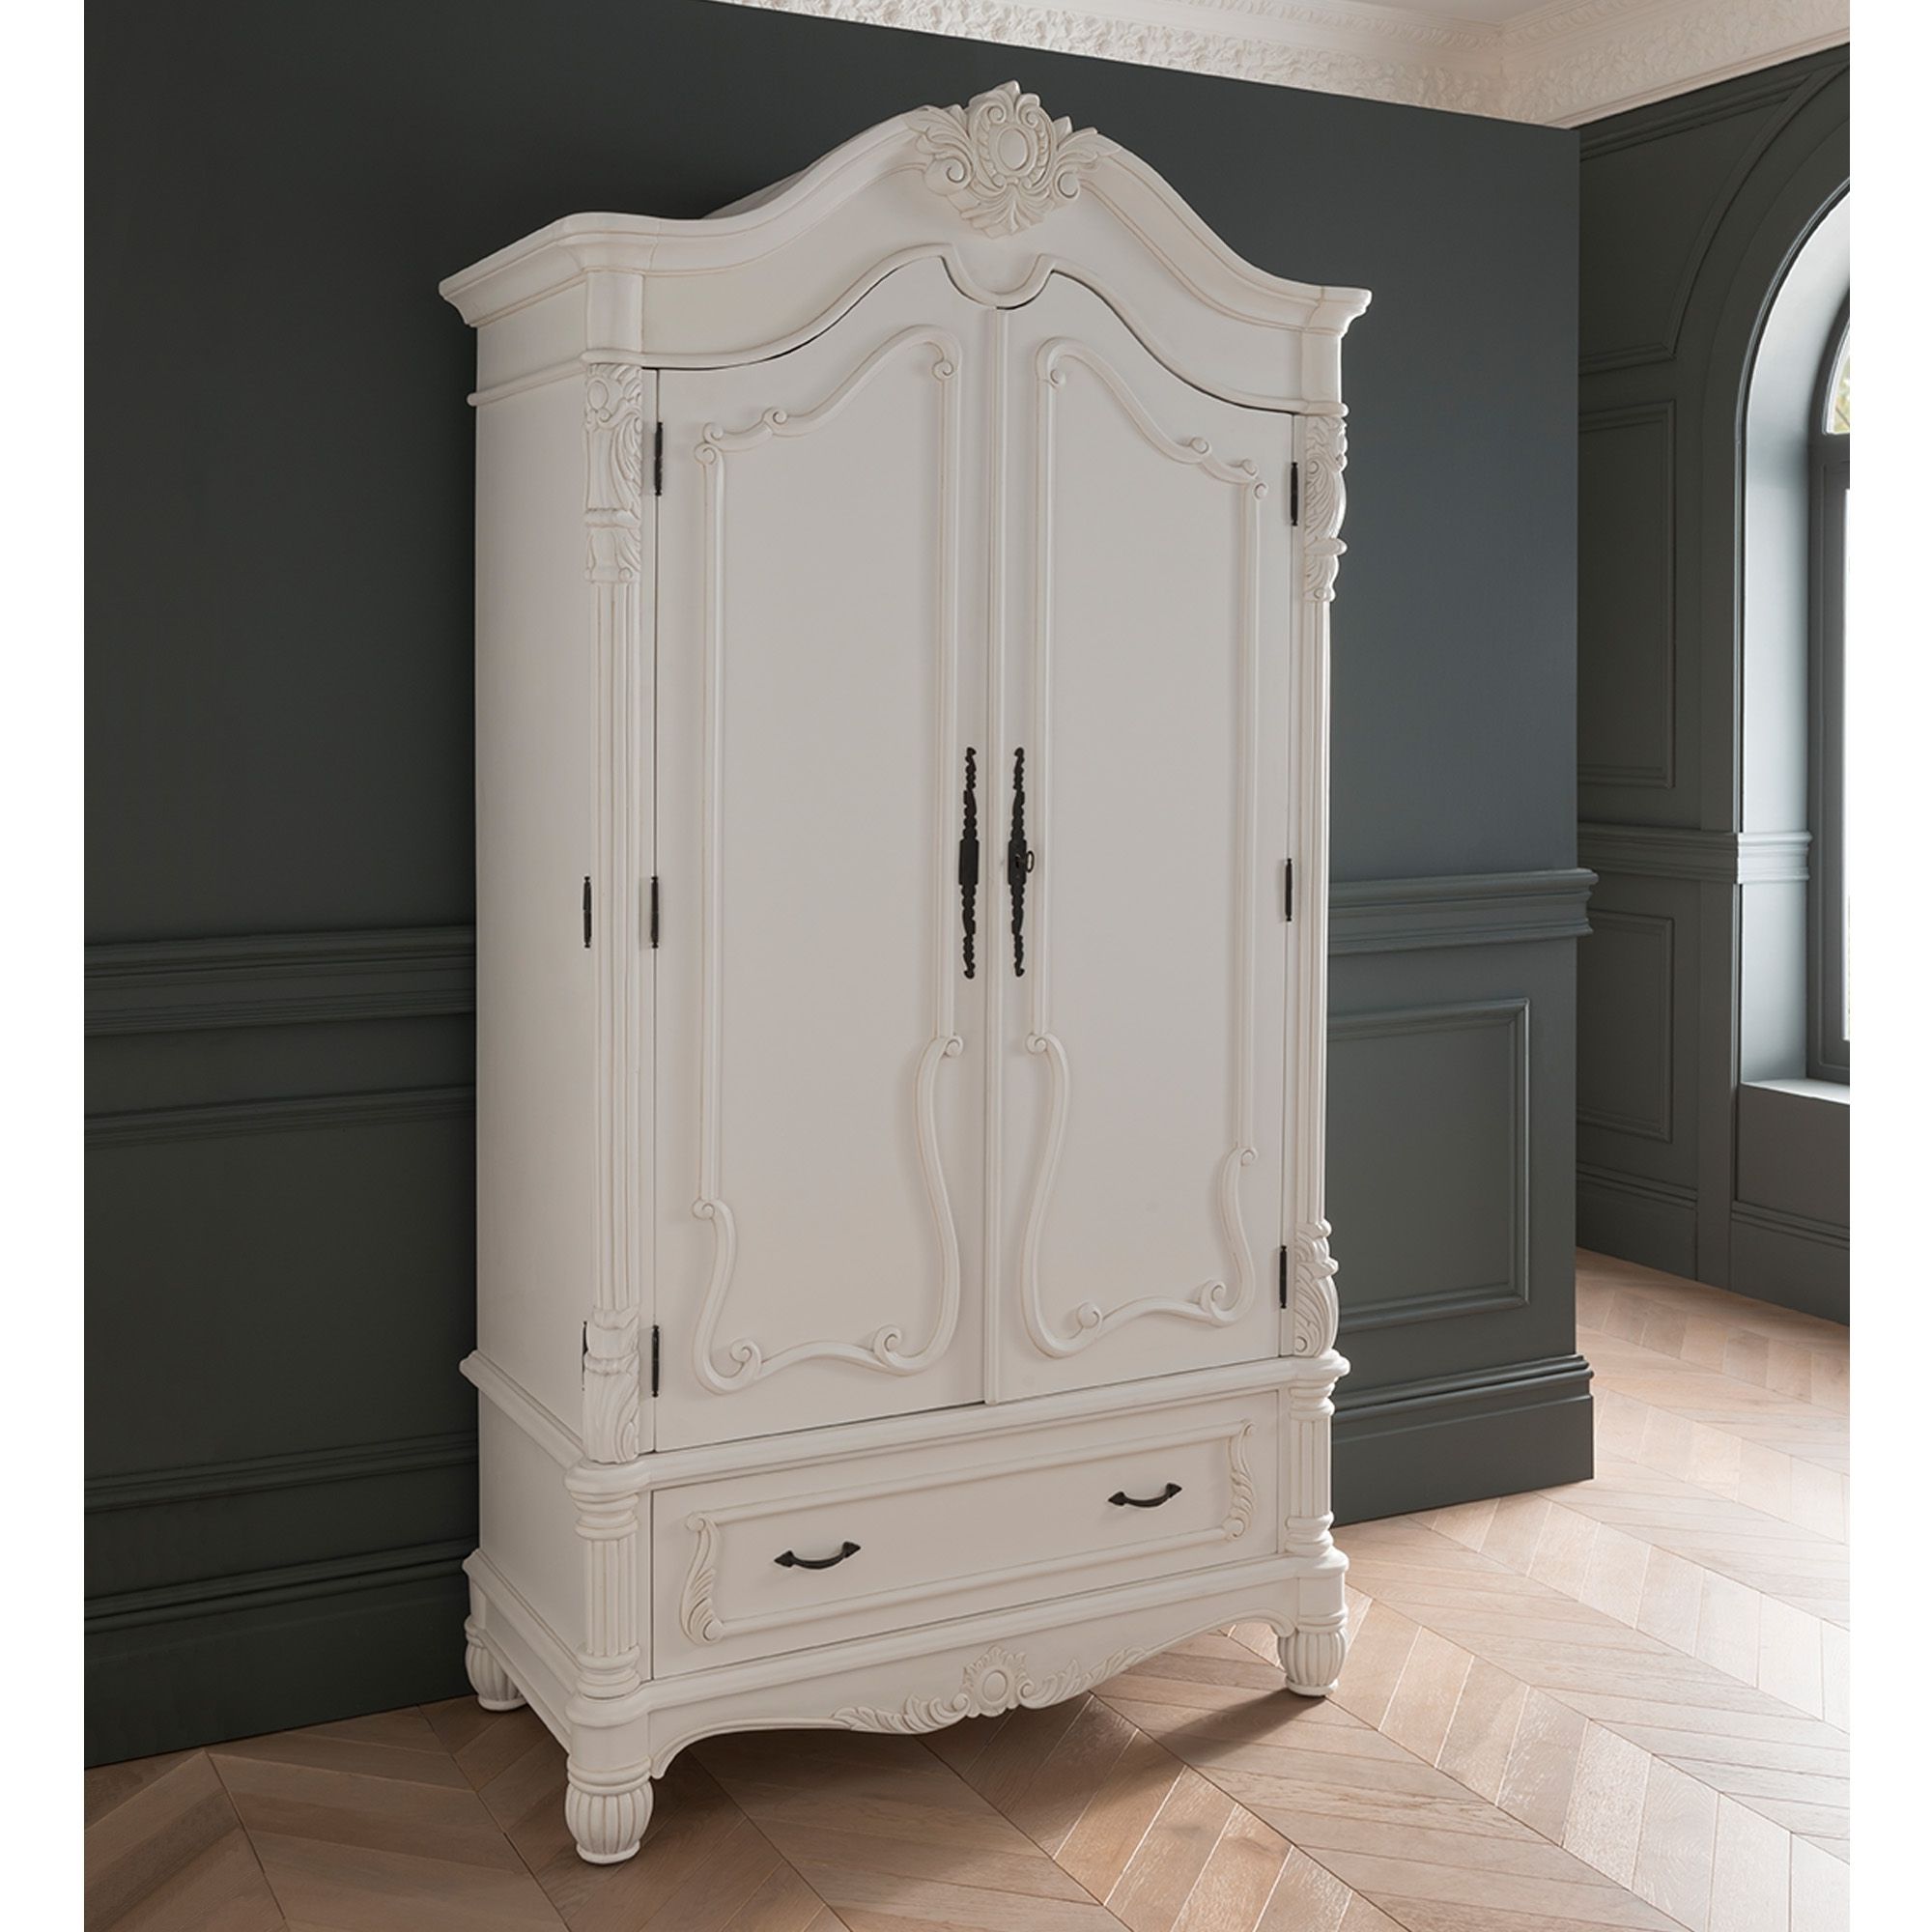 Antique French Style White Finished 1 Drawer Wardrobe | Homesdirect365 With French Style Wardrobes (View 4 of 20)